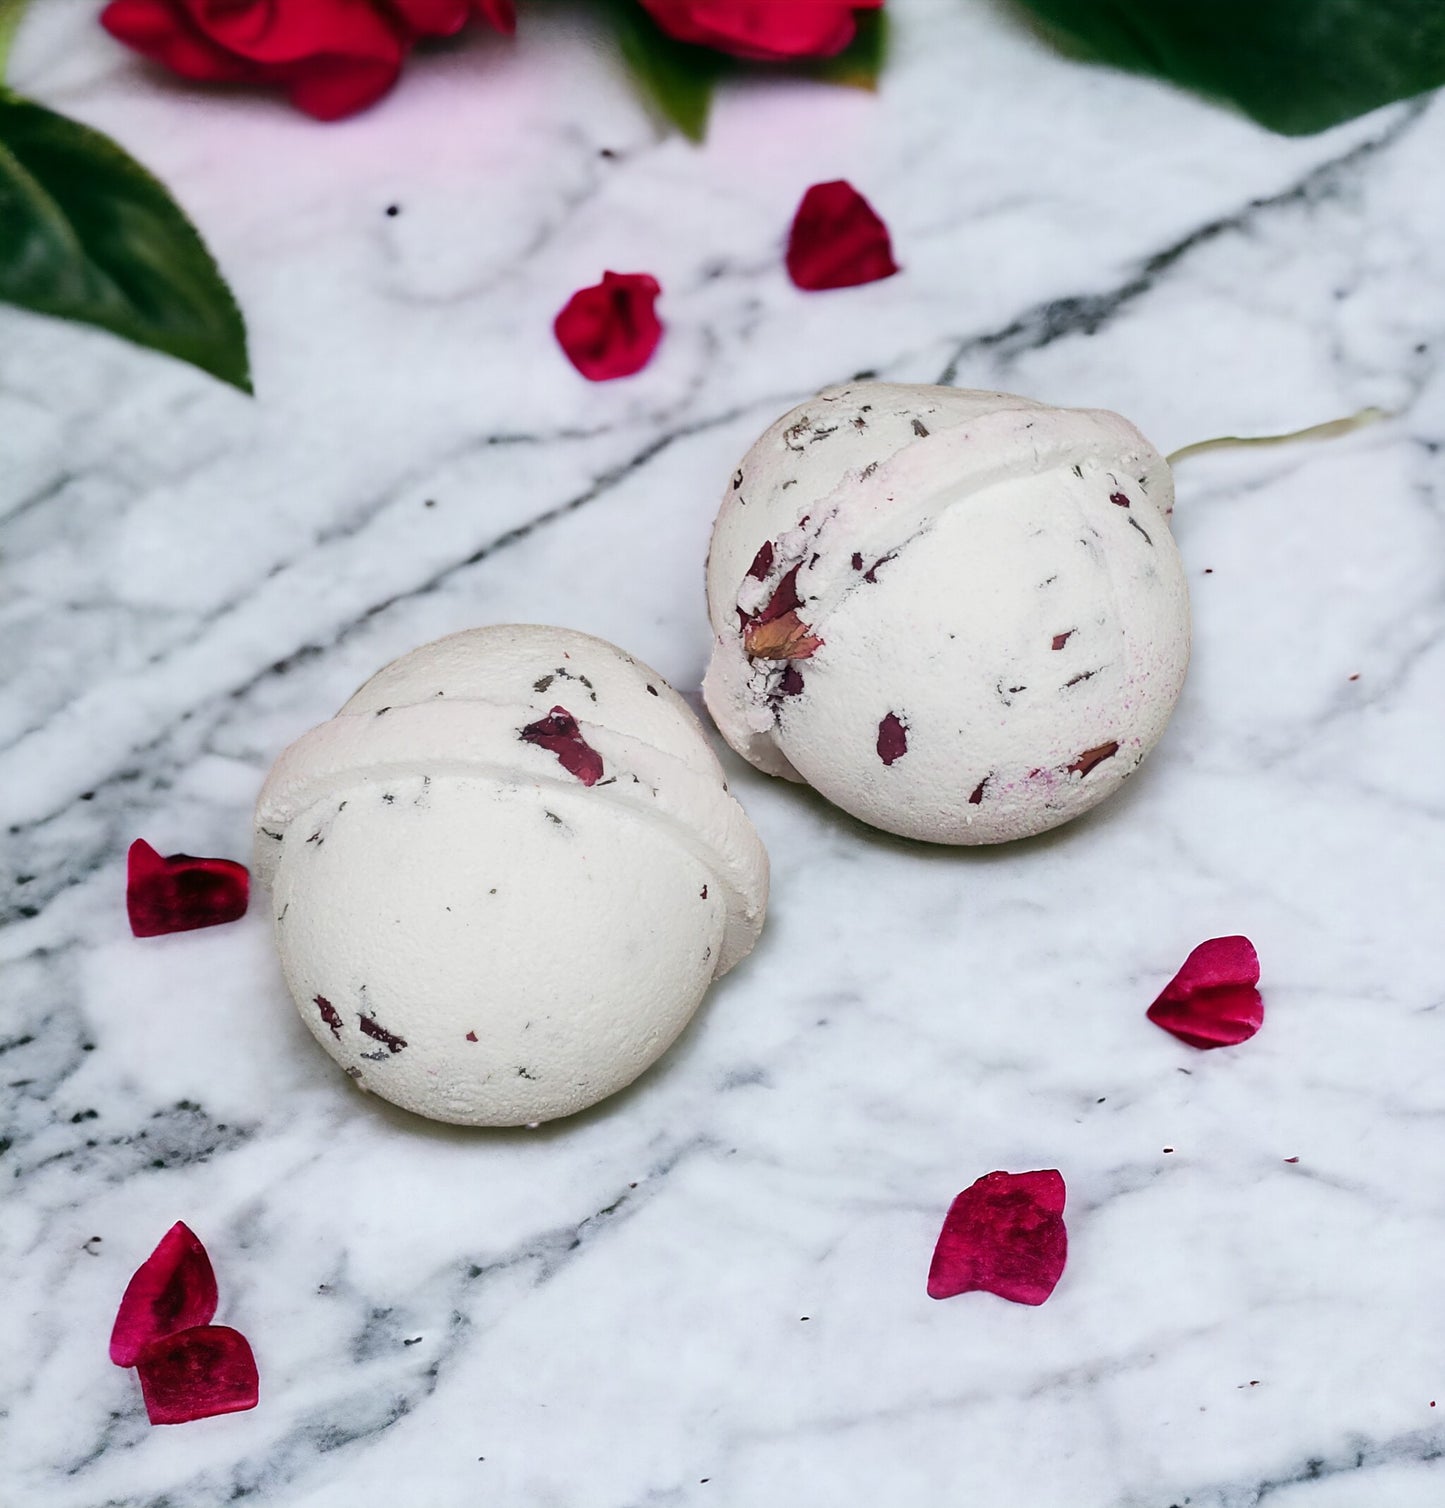 Rose and Lavender bubbly bath bomb